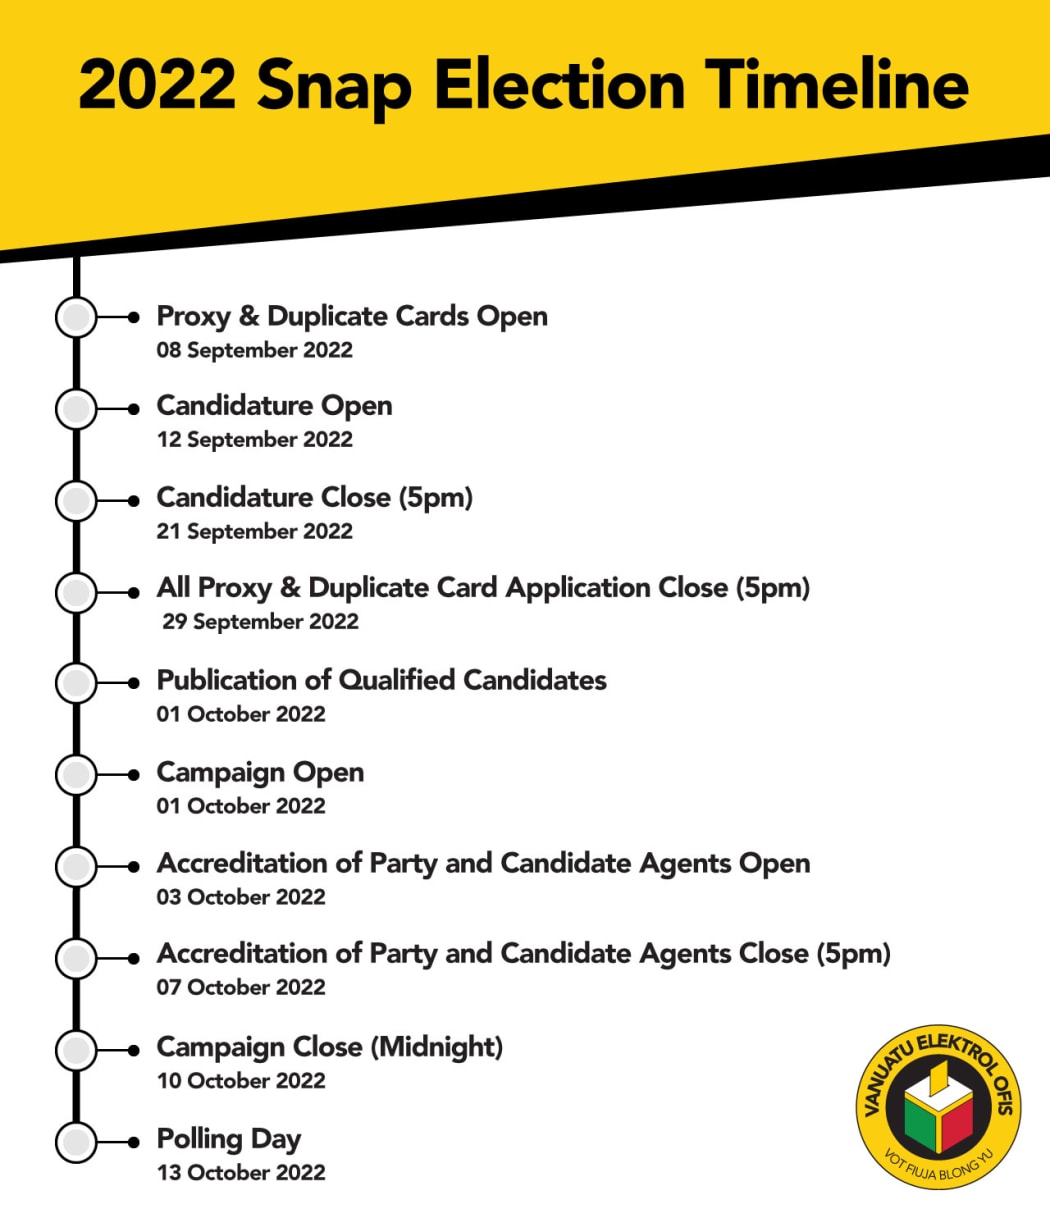 A Snap Election timeline created by the Vanuatu Electoral Office in Port Vila.